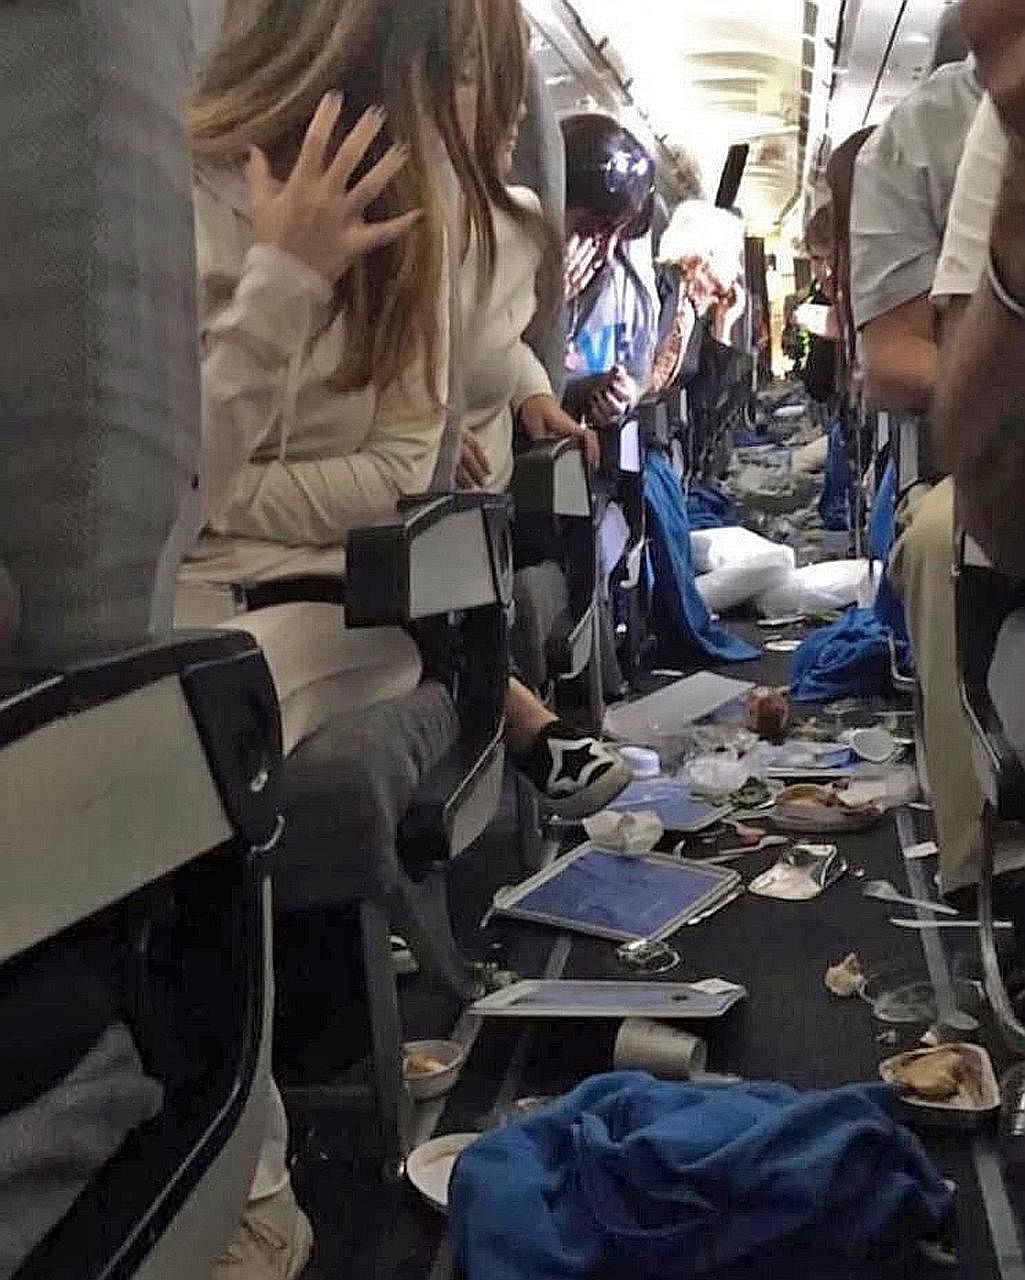 More than a dozen passengers on an Aerolineas Argentinas flight from Miami to Buenos Aires on Oct 18 were injured and taken to hospital when the plane encountered severe turbulence.